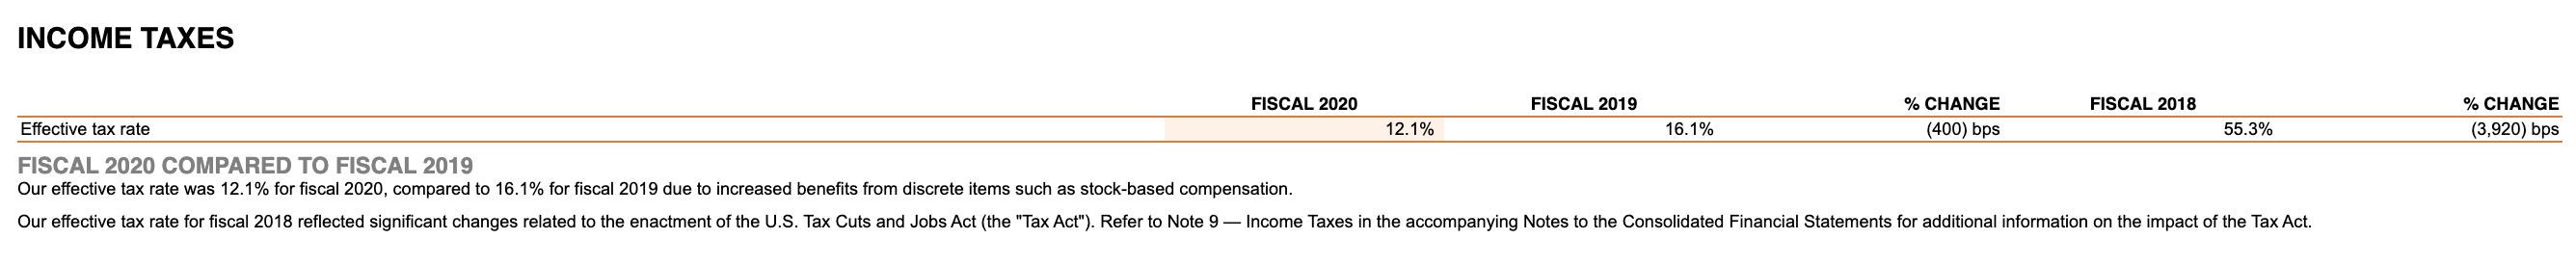 INCOME TAXES FISCAL 2020 FISCAL 2019 FISCAL 2018 % CHANGE (400) bps % CHANGE (3,920) bps Effective tax rate 12.1% 16.1% 55.3%